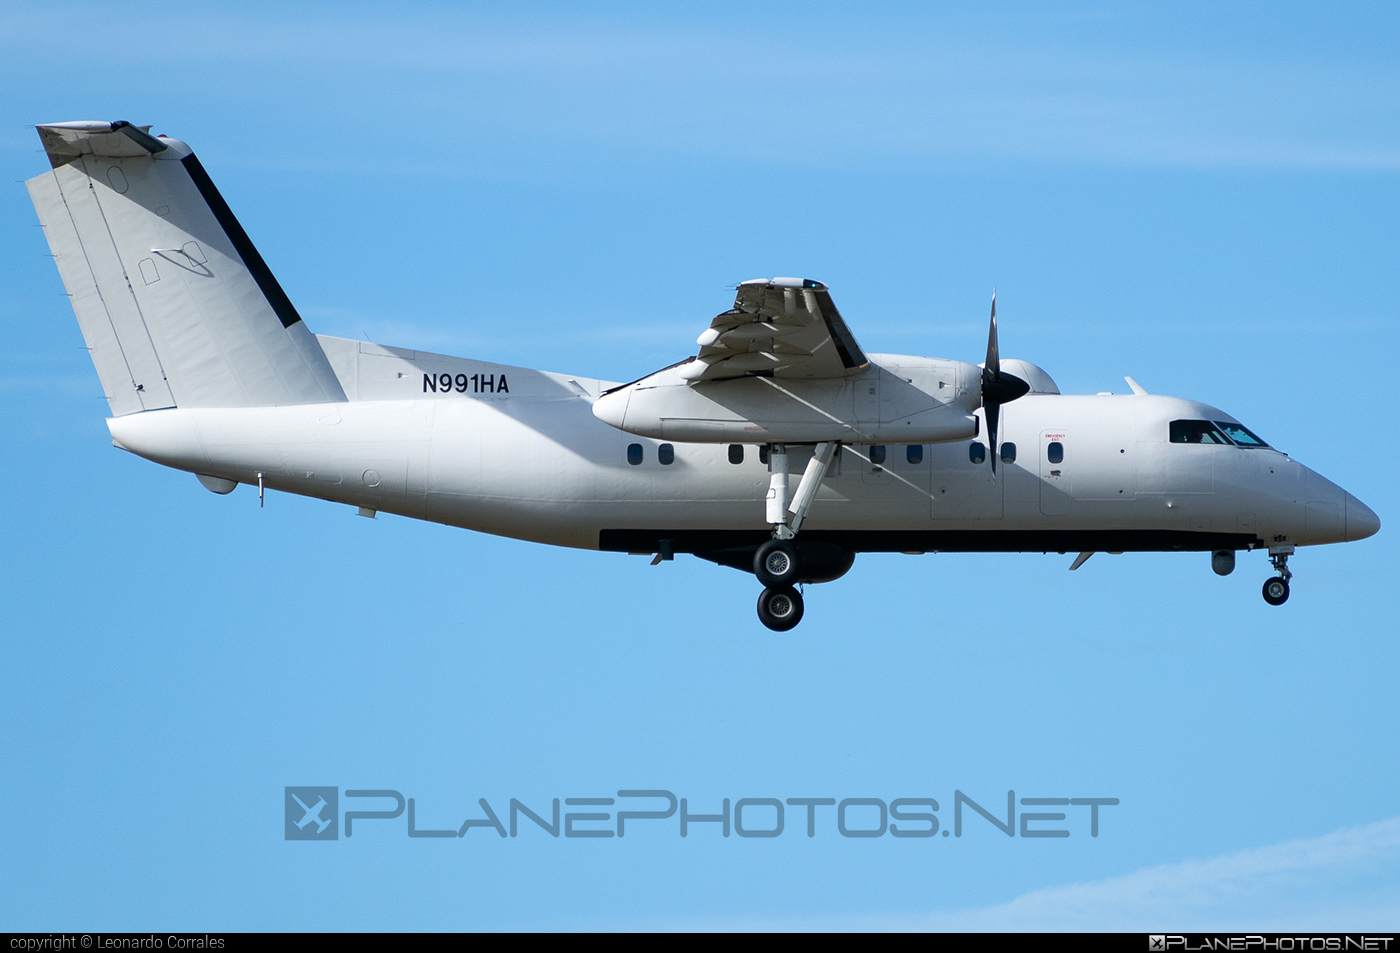 Bombardier DHC-8-202 Dash 8 - N991HA operated by 645th Aeronautical Systems Group (AESG) #645AeronauticalSystemsGroup #aesg #bombardier